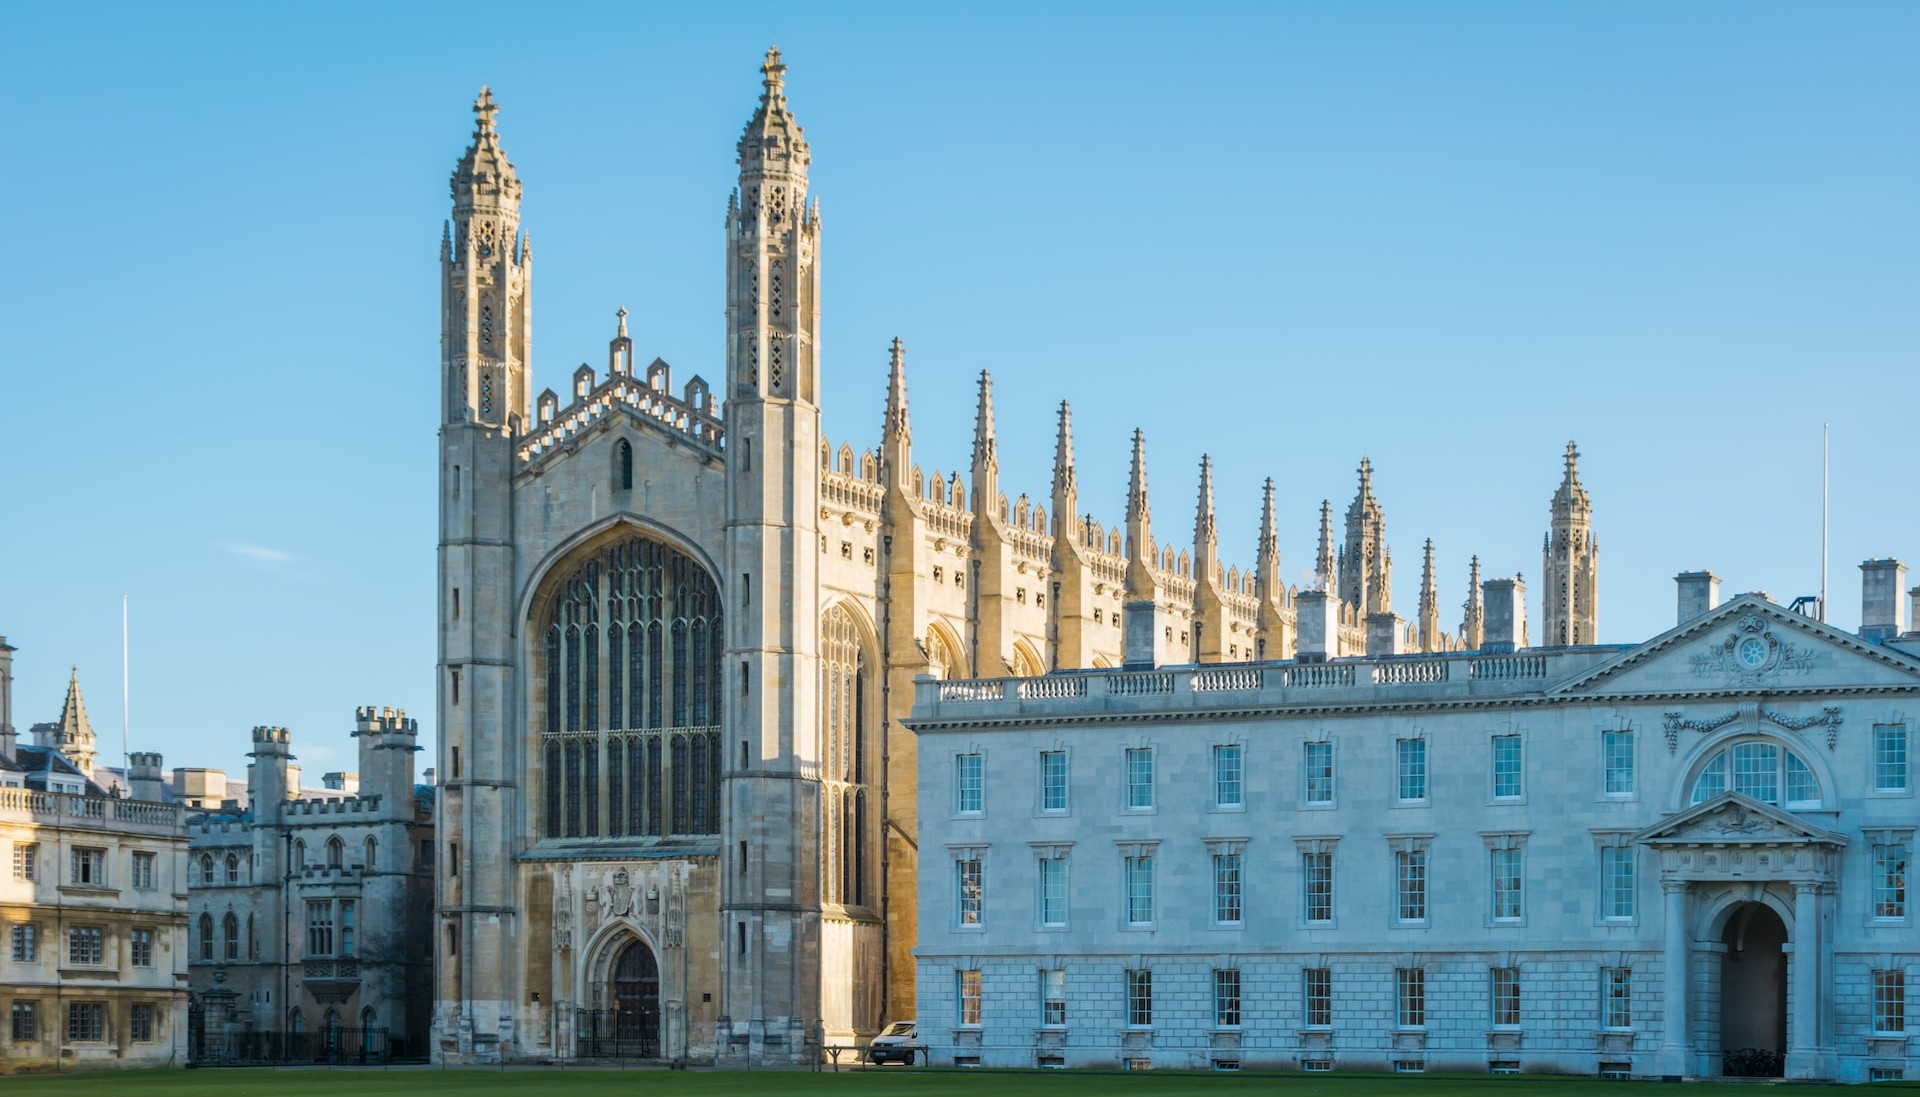 Degrees in British Studies can be obtained in many countries. This page contains a selection of educational programs from universities in the UK and European Union, that provide courses on British Studies.